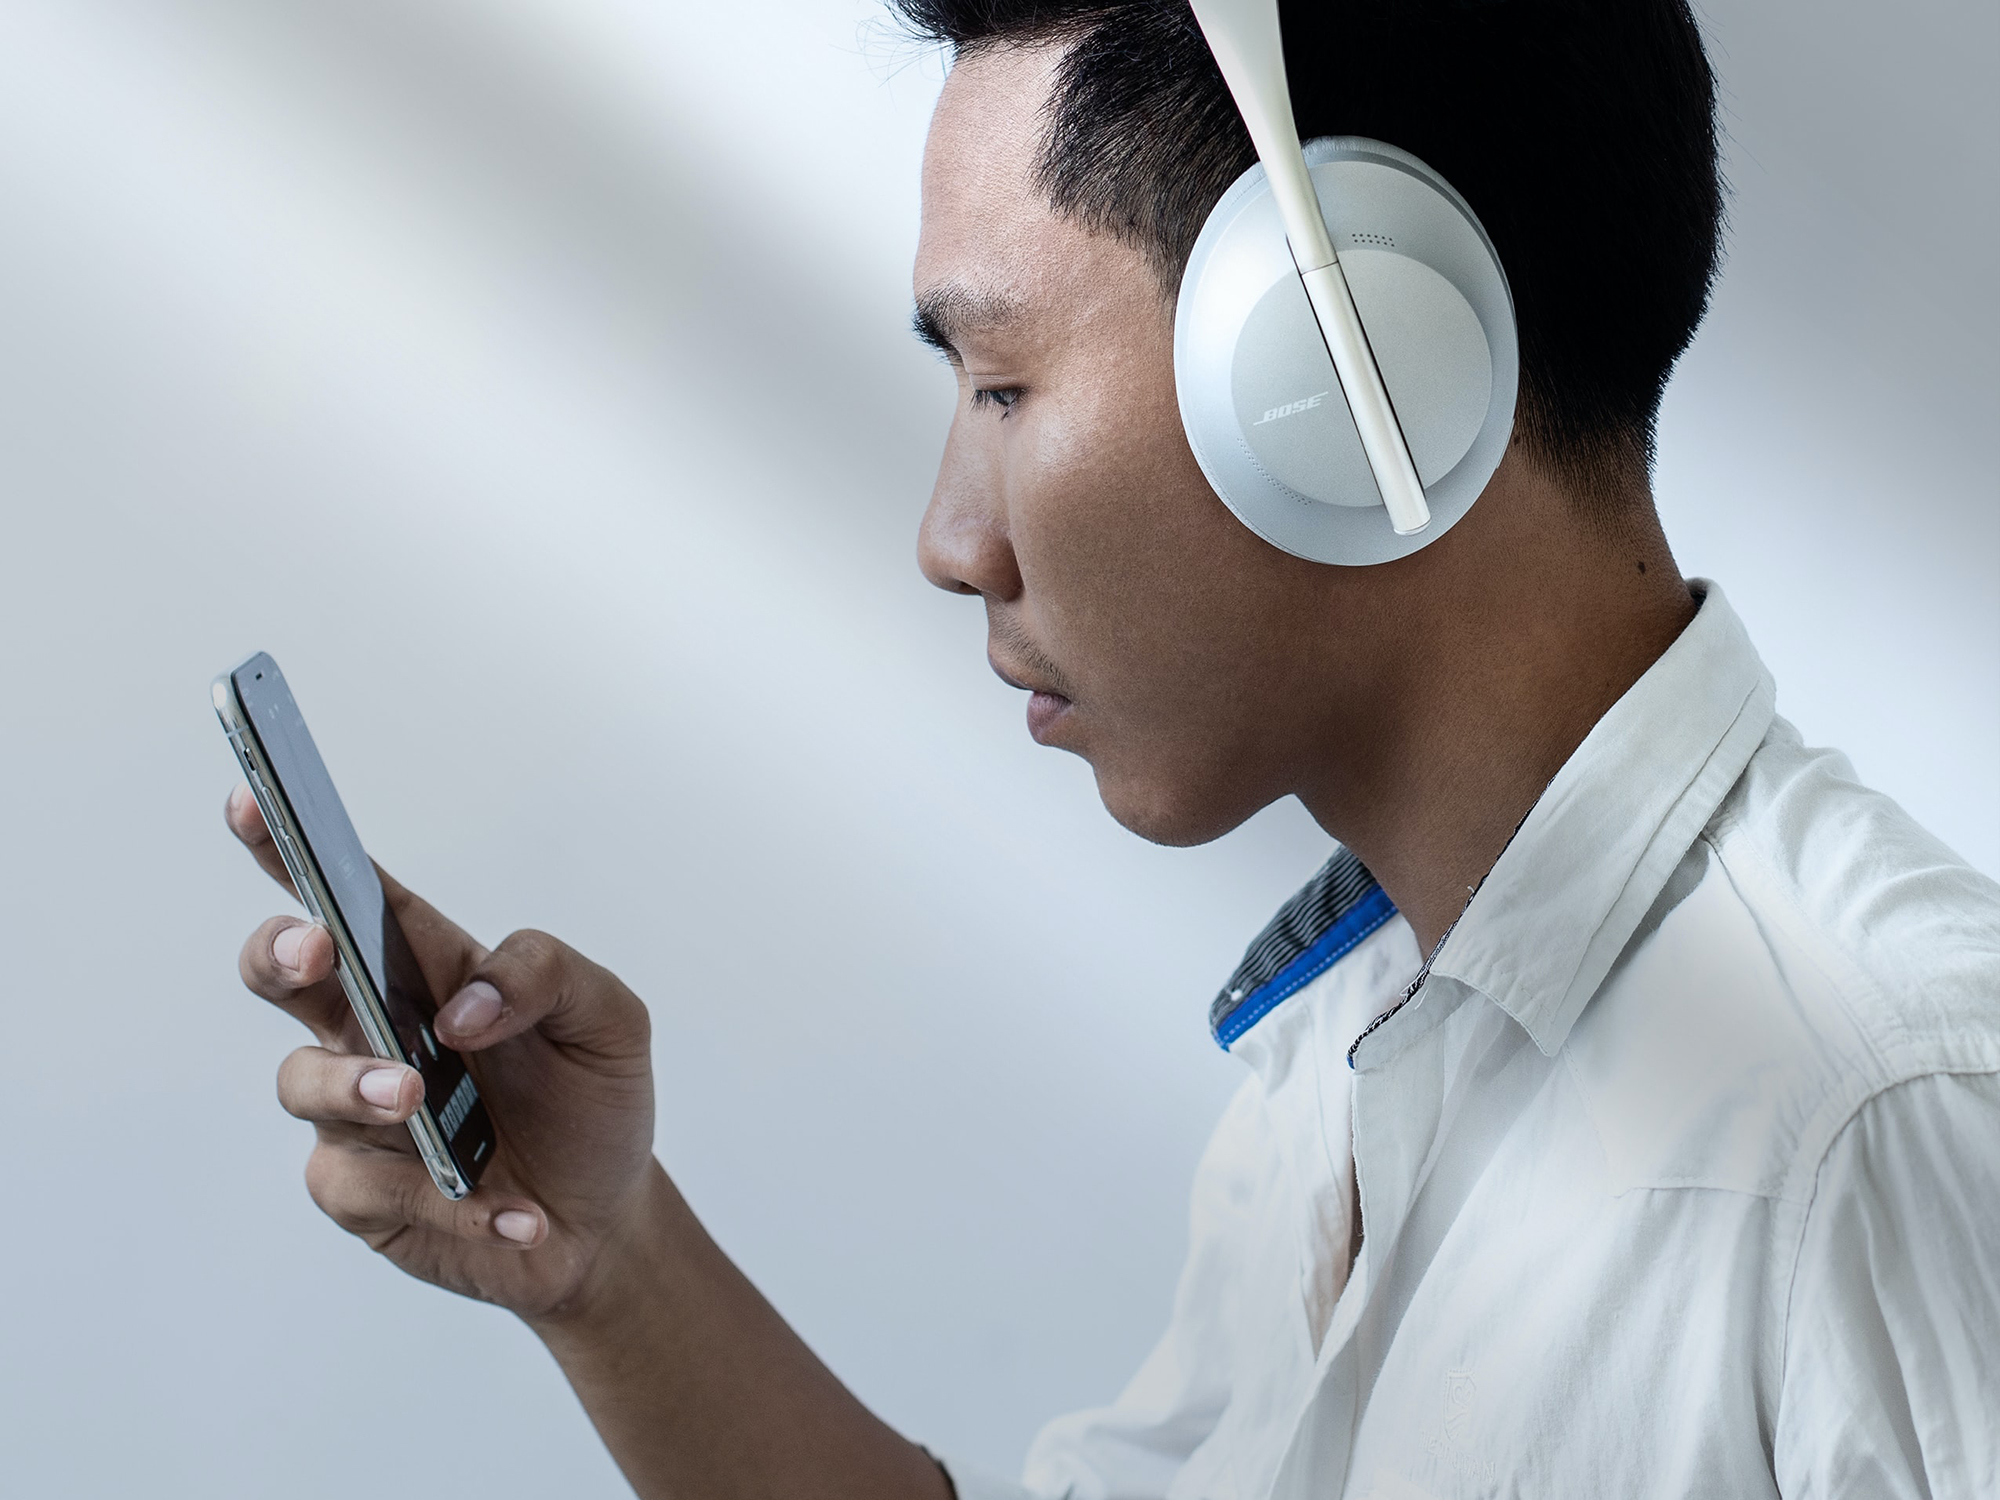 Person with headphones playing audio on smartphone